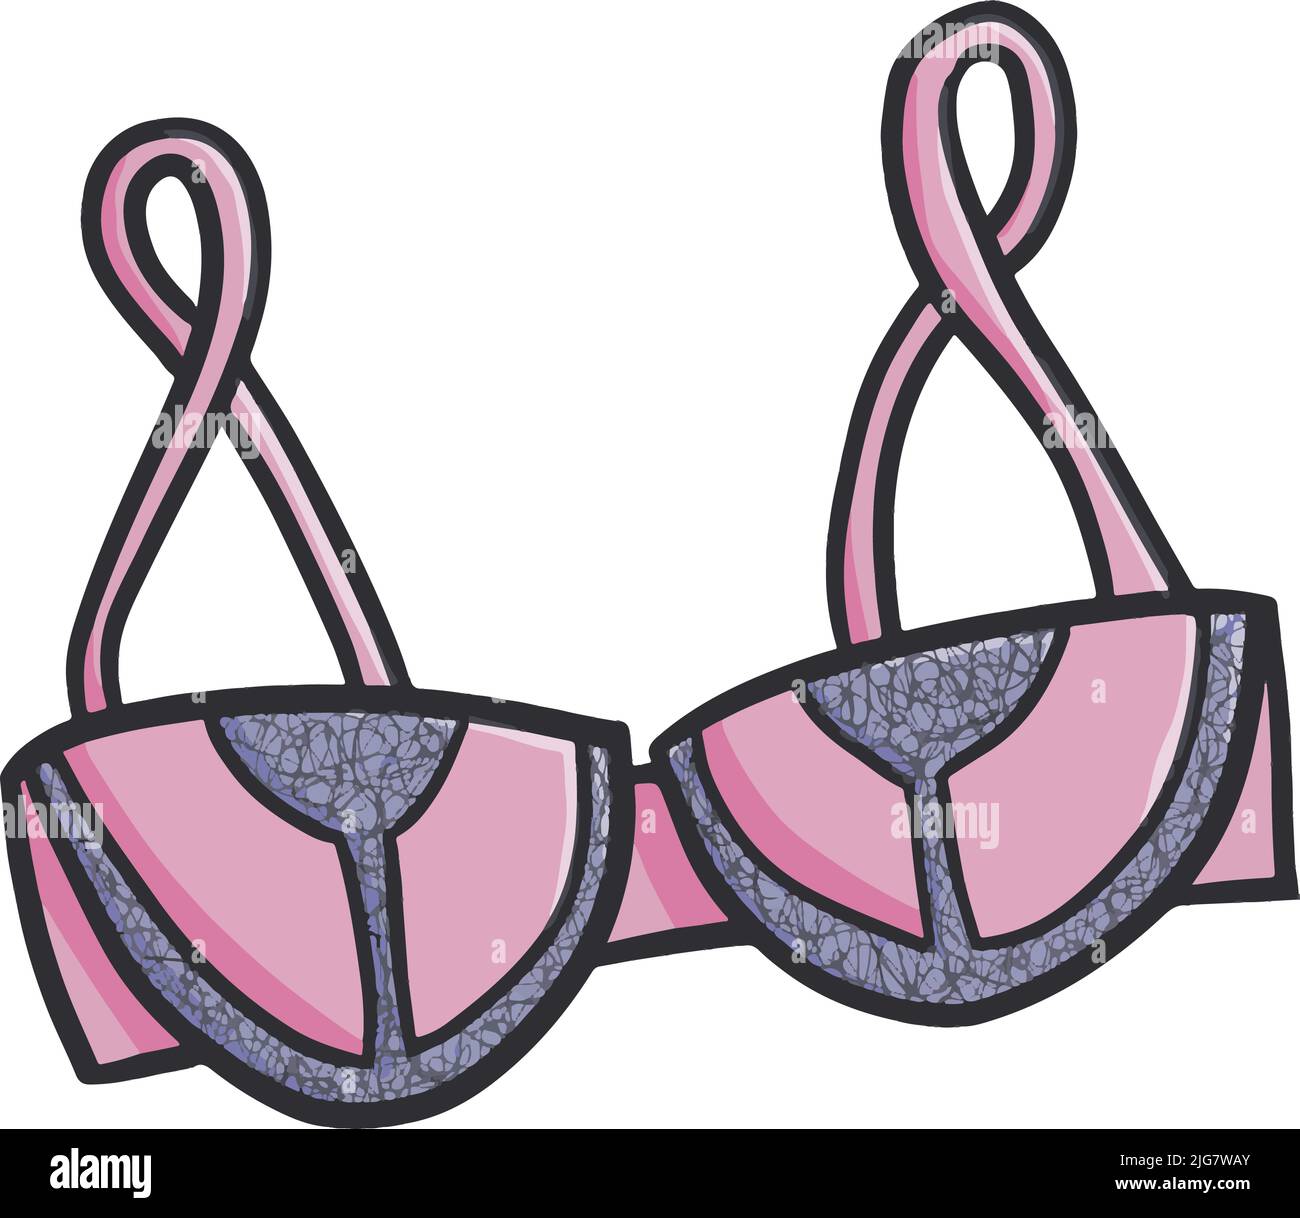 Bra pink Cut Out Stock Images & Pictures - Alamy